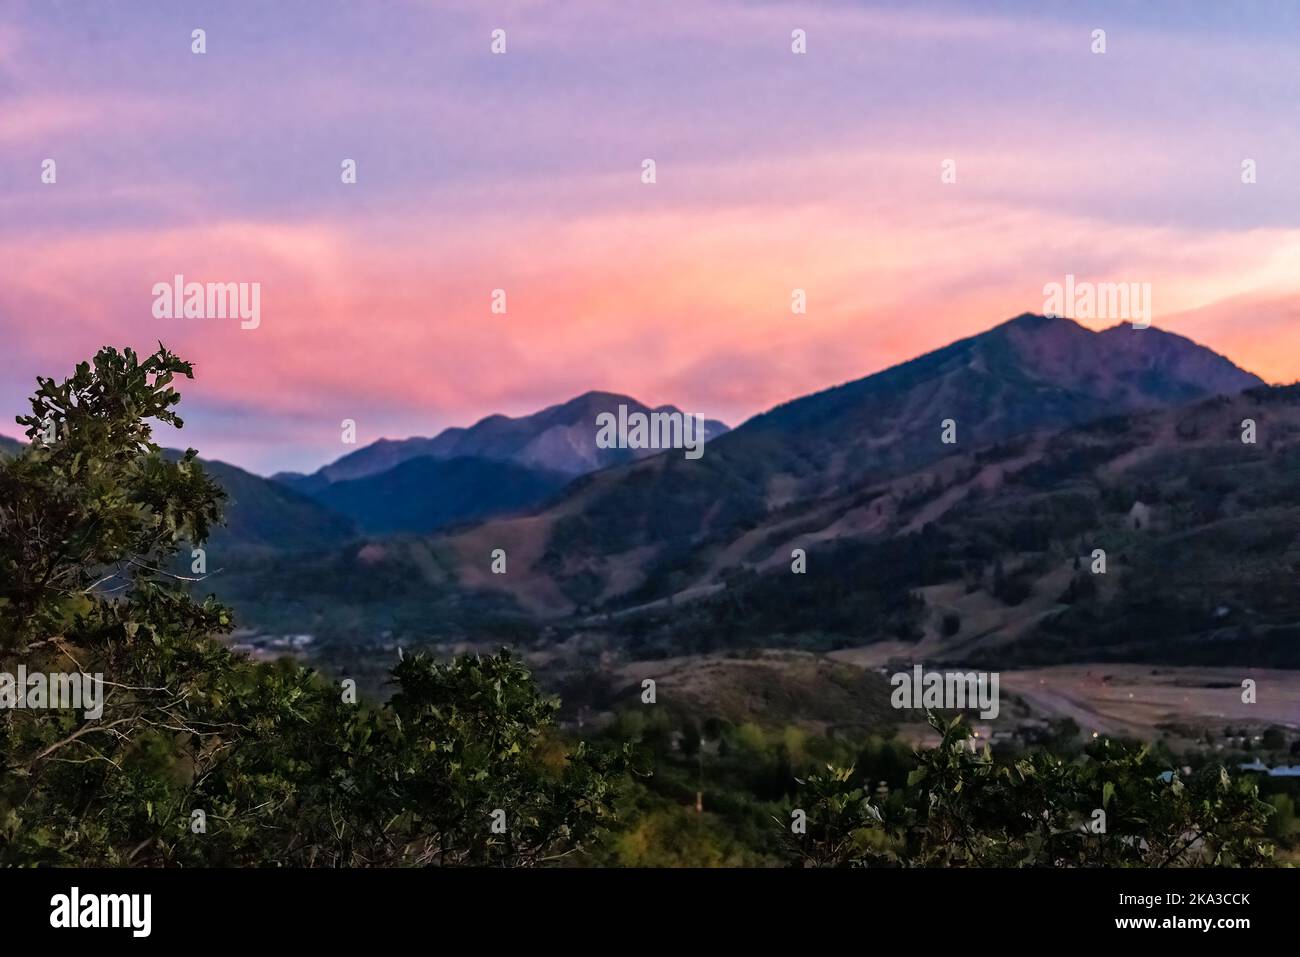 Aspen highlands in Colorado colorful purple pink twilight sunset in rocky mountains roaring fork valley with autumn foliage in fall season Stock Photo